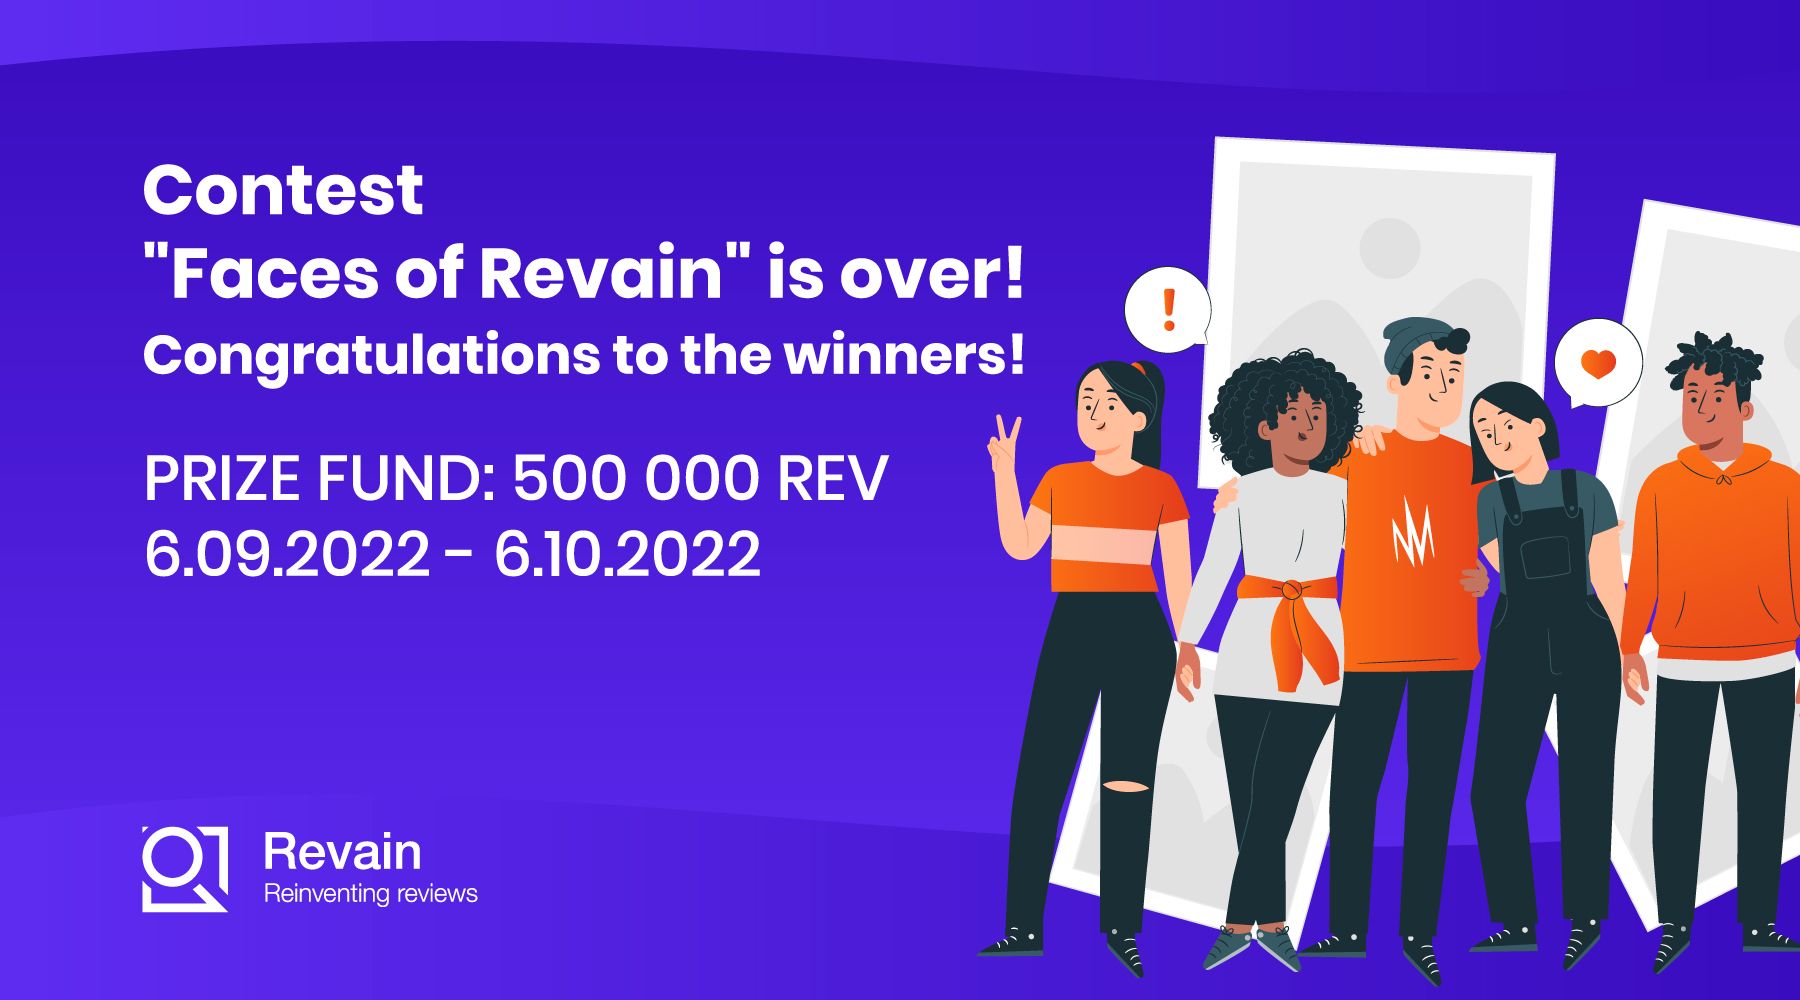 Article The photo contest "Faces of Revain" is over!